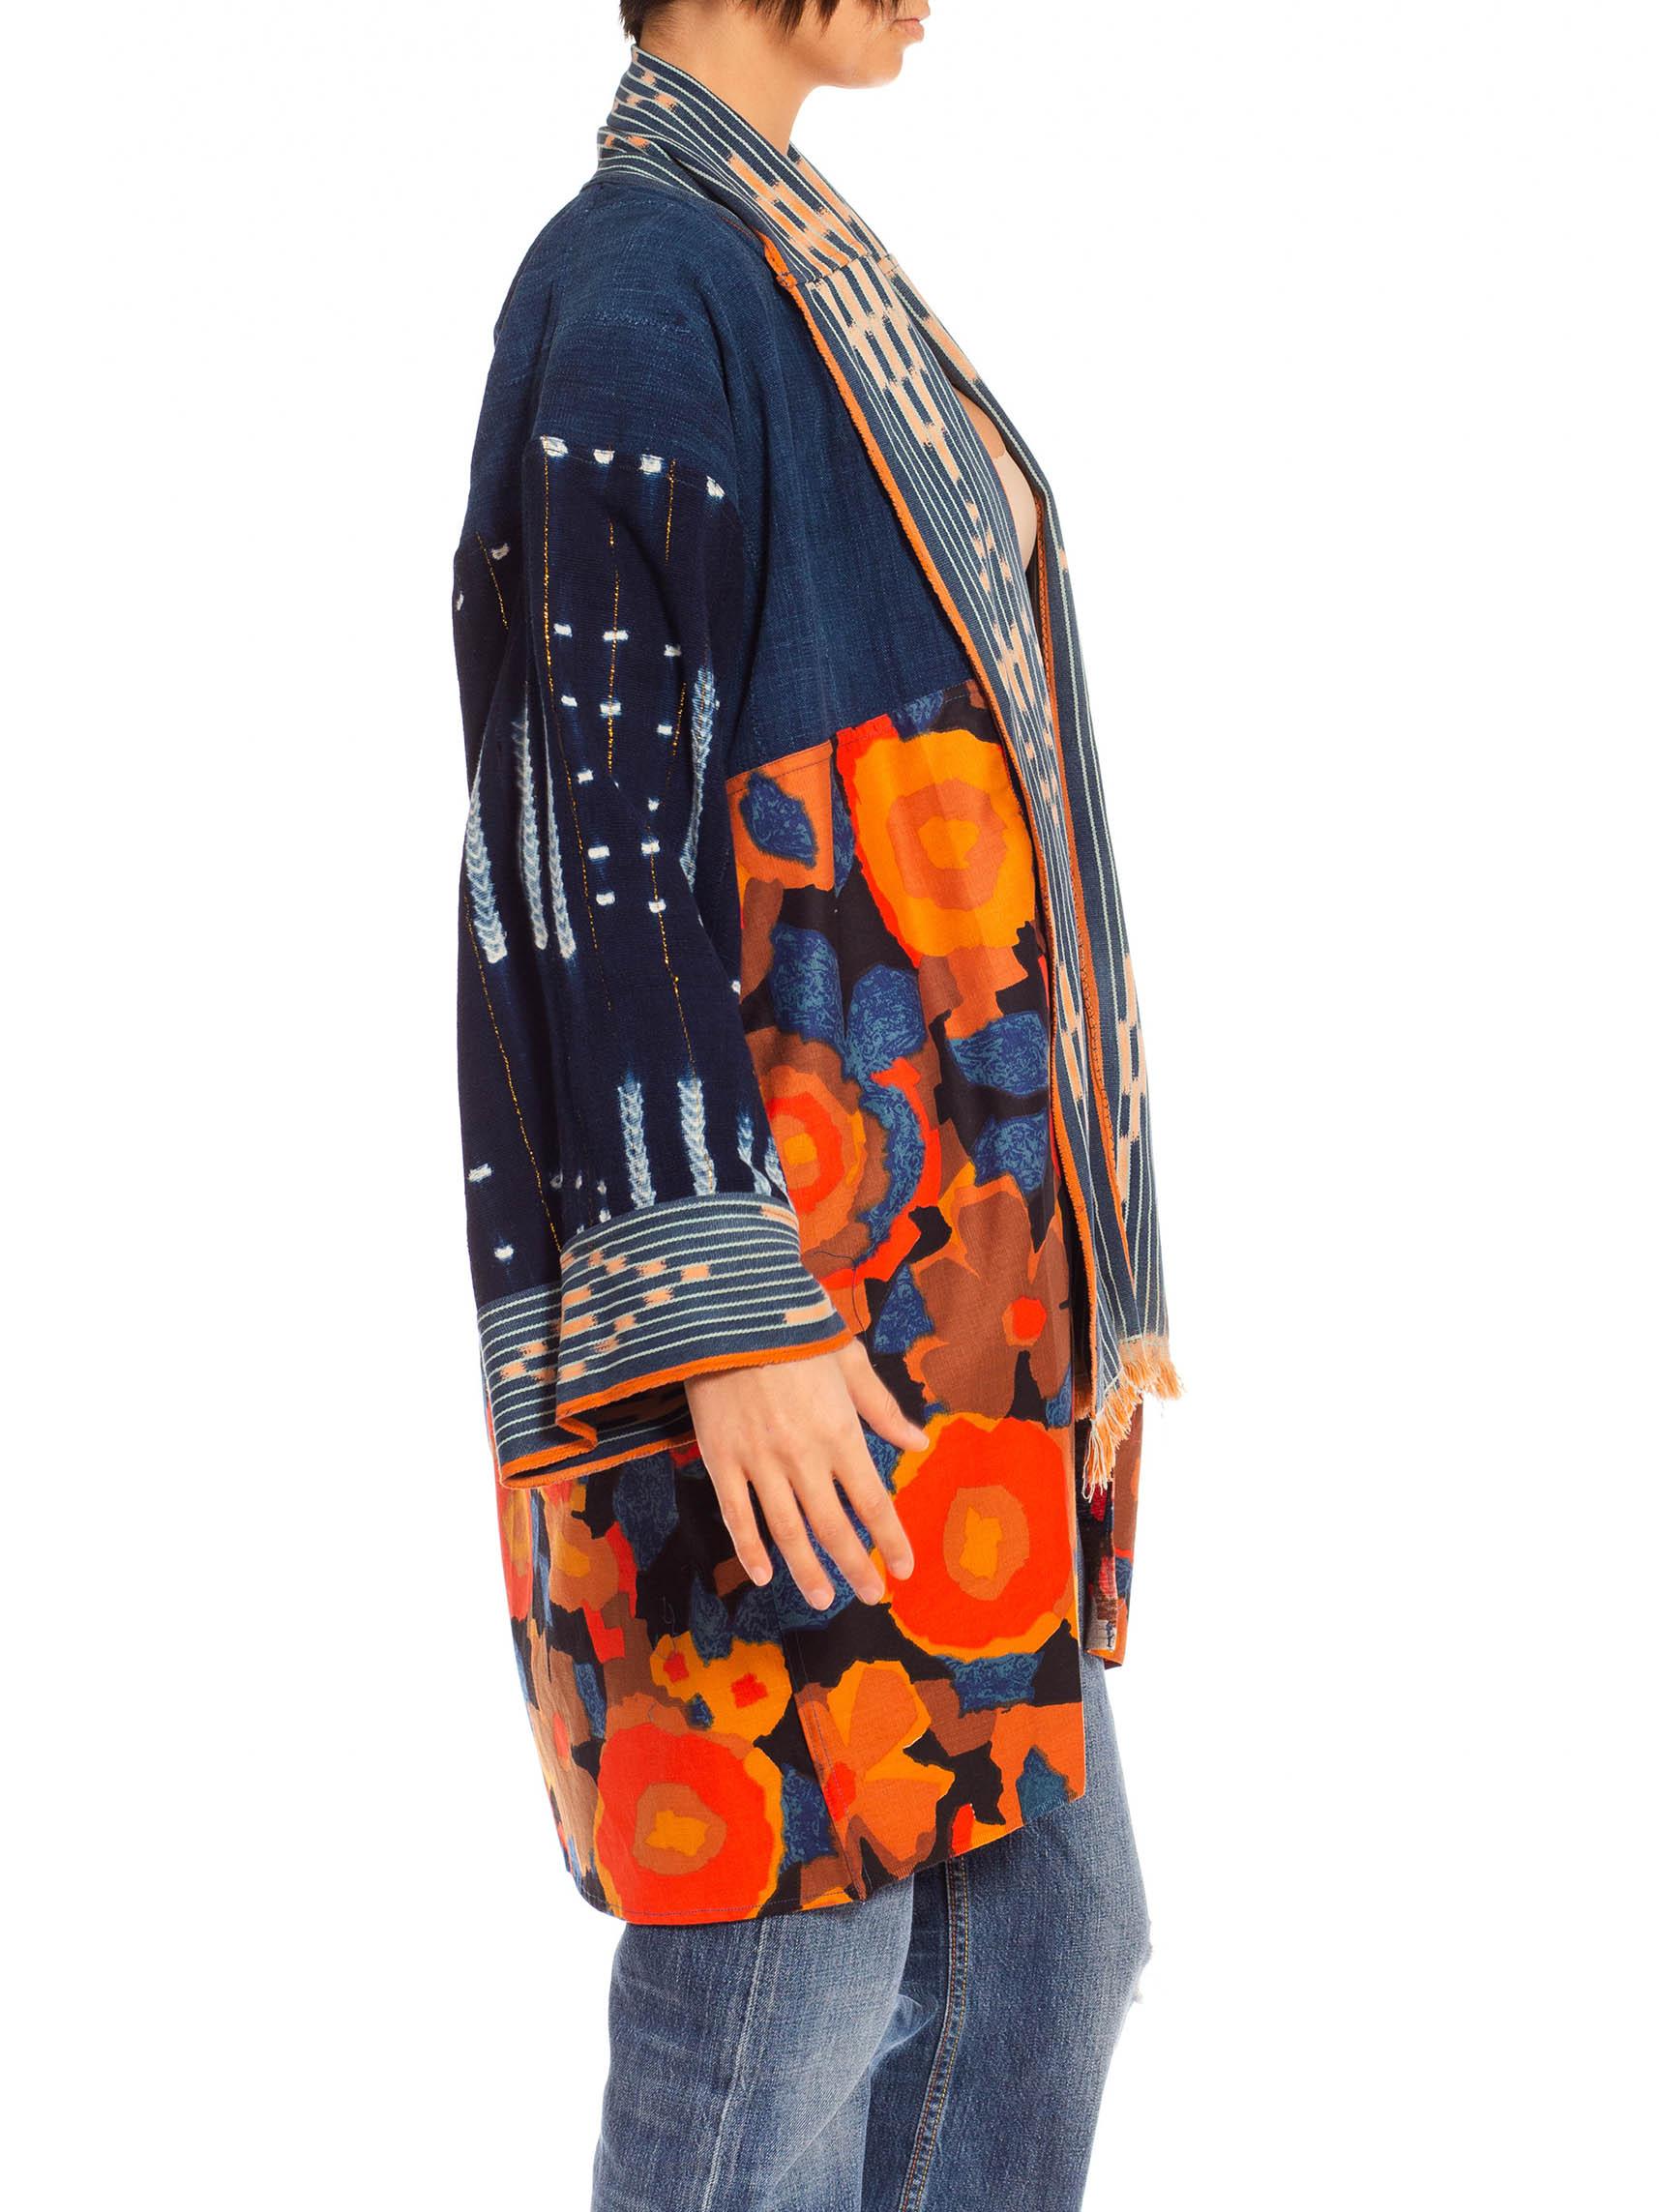 Made from vintage fabrics so small areas of wear or vintage repairs are expected and add to the story of the piece. Morphew Collection Blue & Orange Cotton Up-Cycled Vintage Fabrics African Indigo Duster 
MORPHEW COLLECTION is made entirely by hand